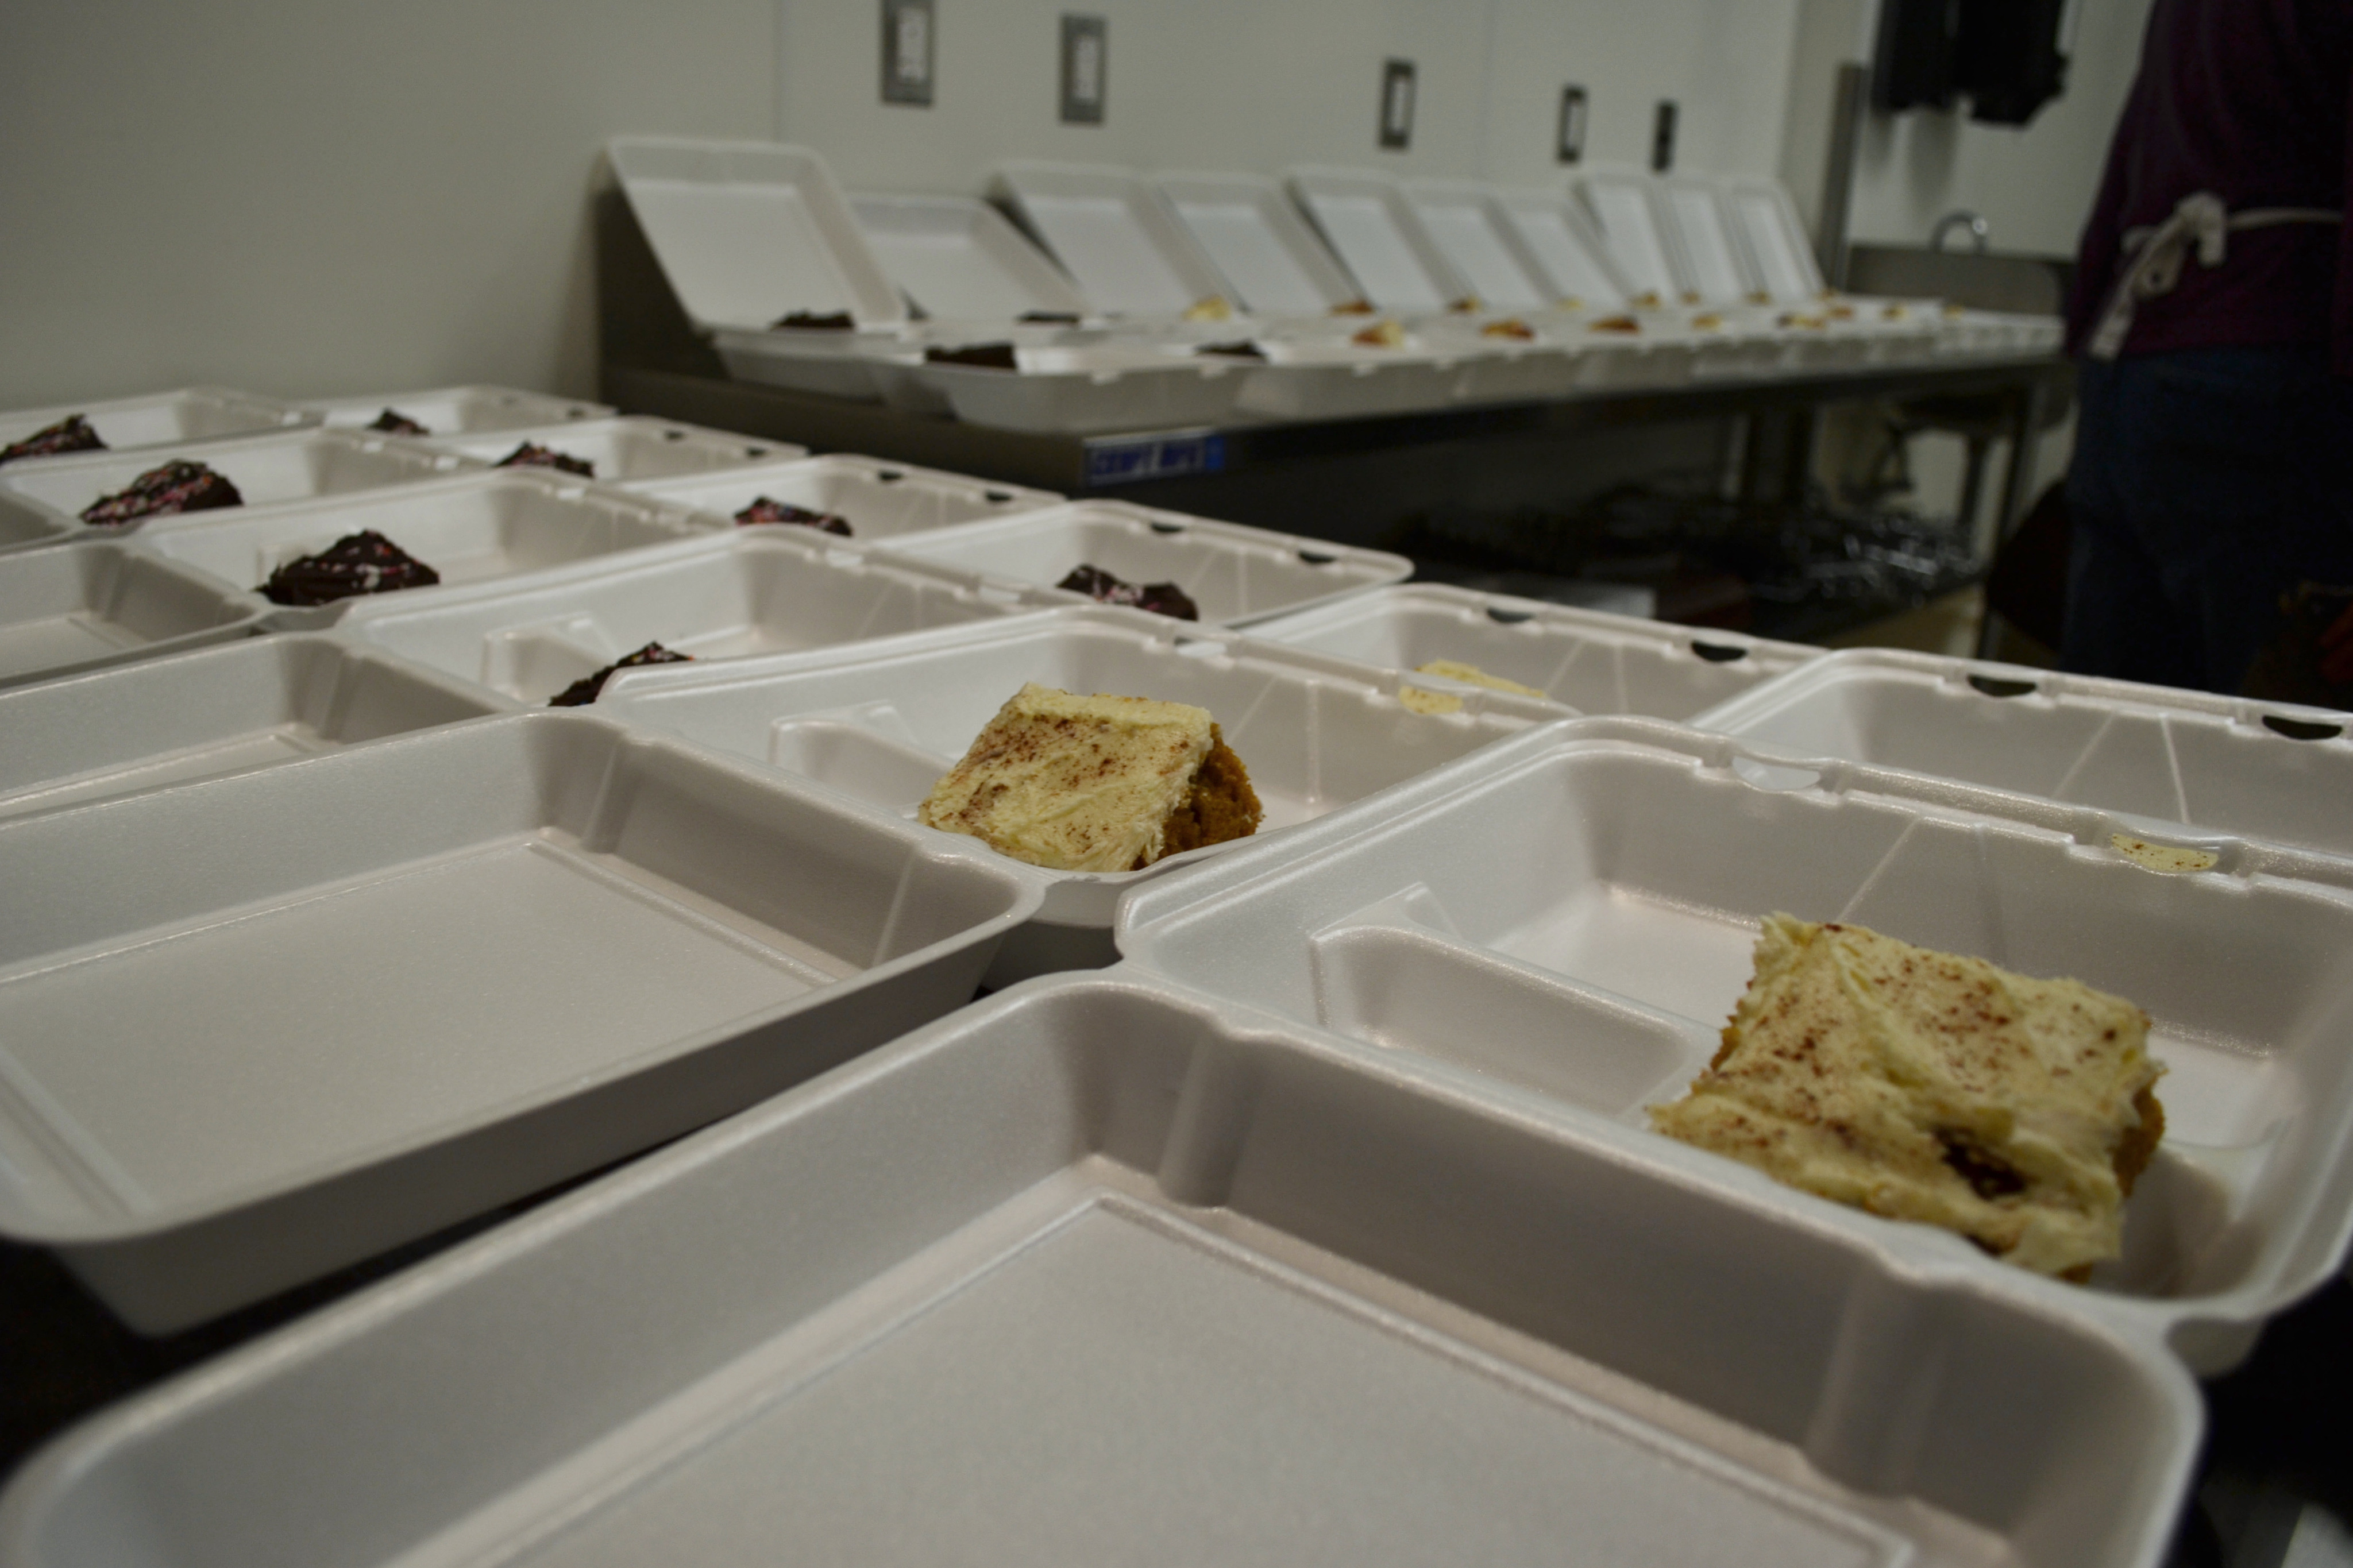 Many clamshell containers have one slice of cake and other partitions ready for scooping food. Photo by Alyssa Buckley.